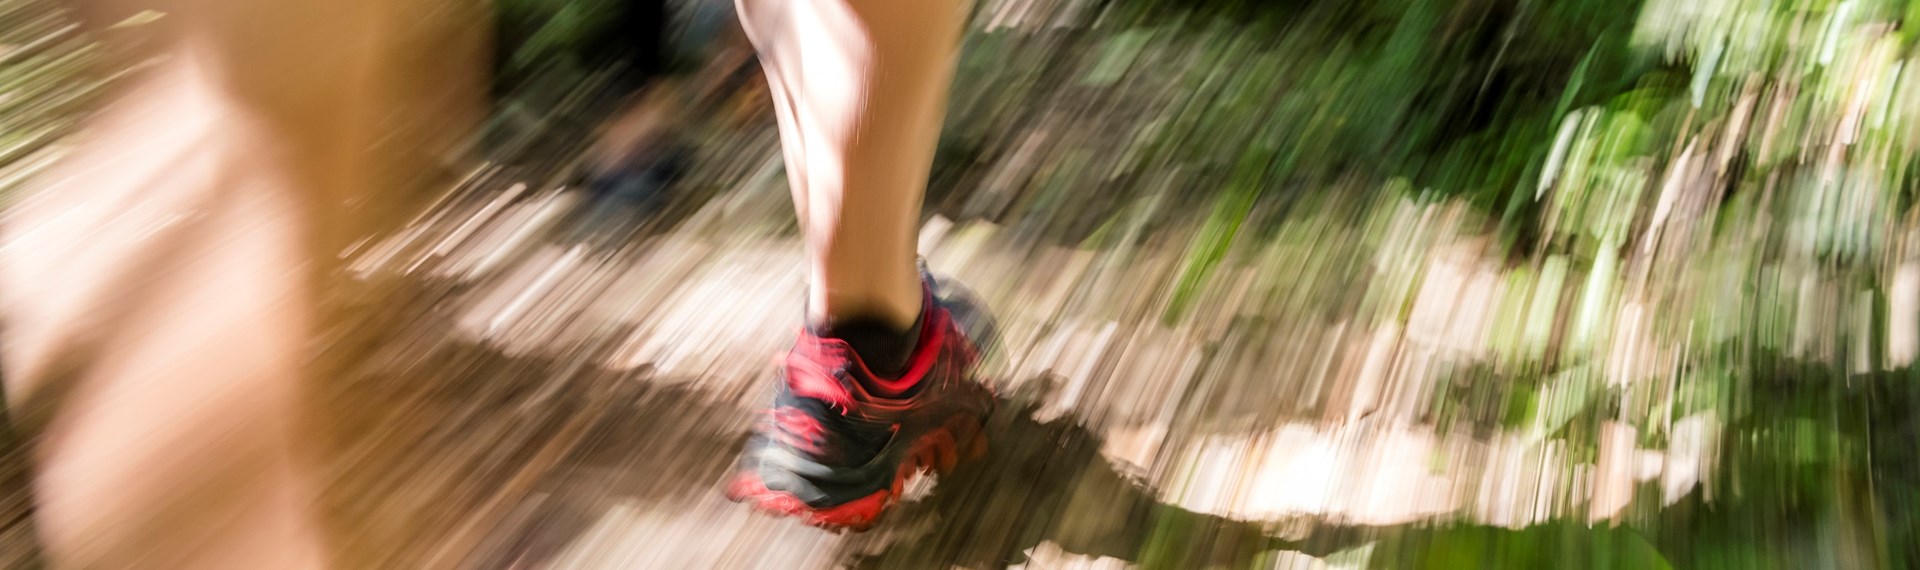 The legs and feet of a runner on the Queen Charlotte Track in the Marlborough Sounds, New Zealand.